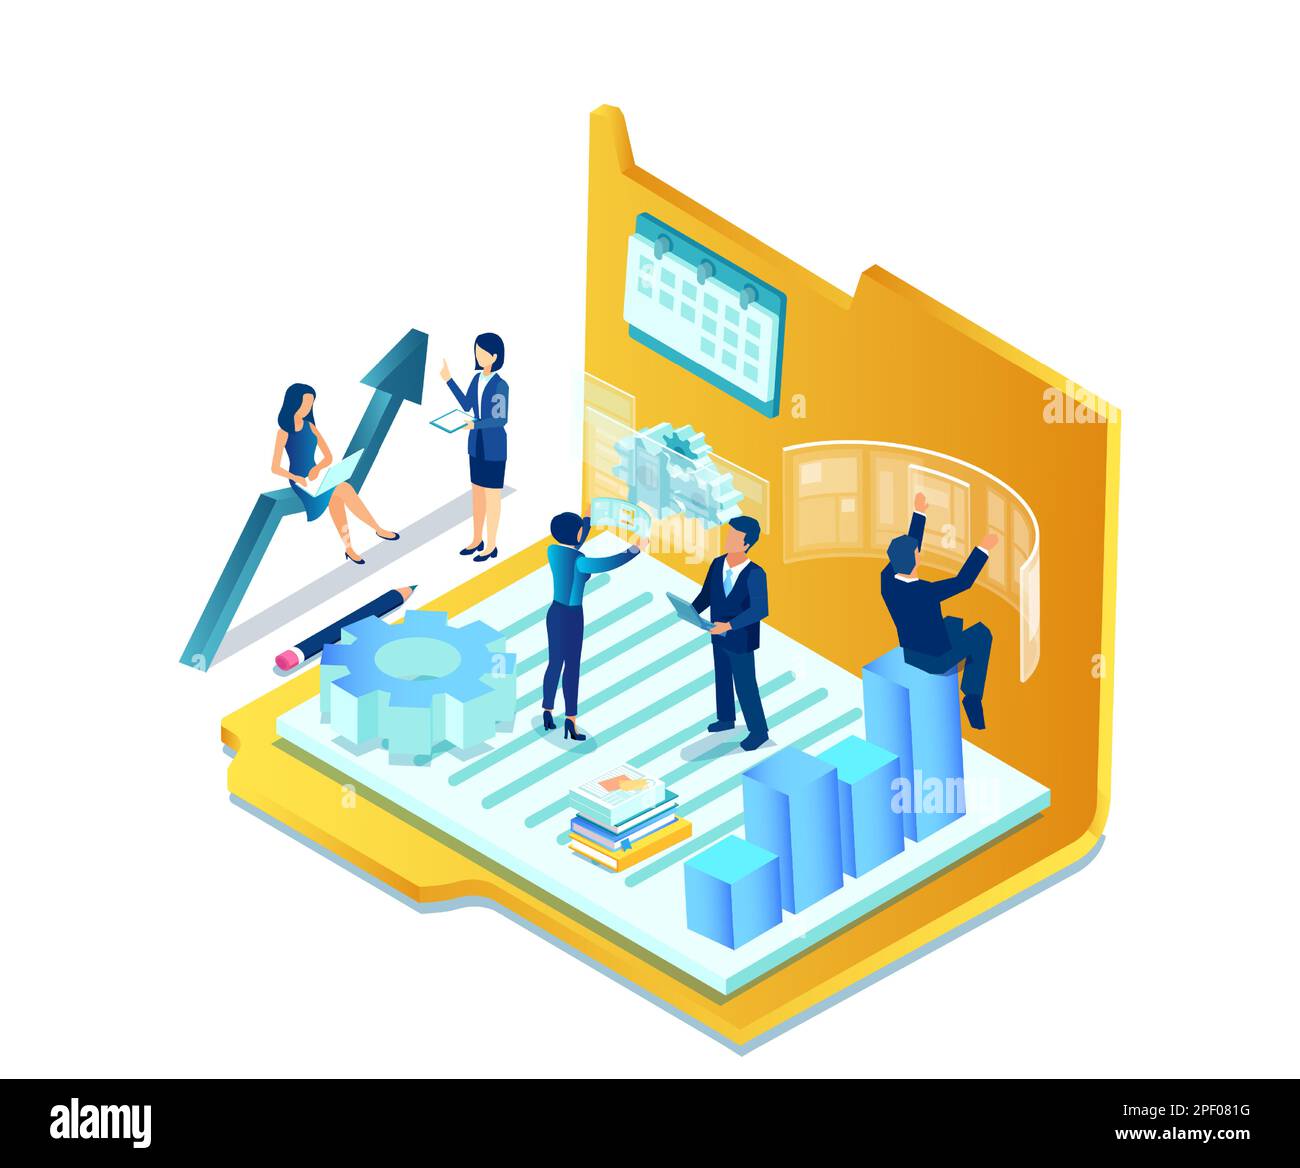 Vector of business people working in an office analyzing financial data brainstorming new ideas Stock Vector